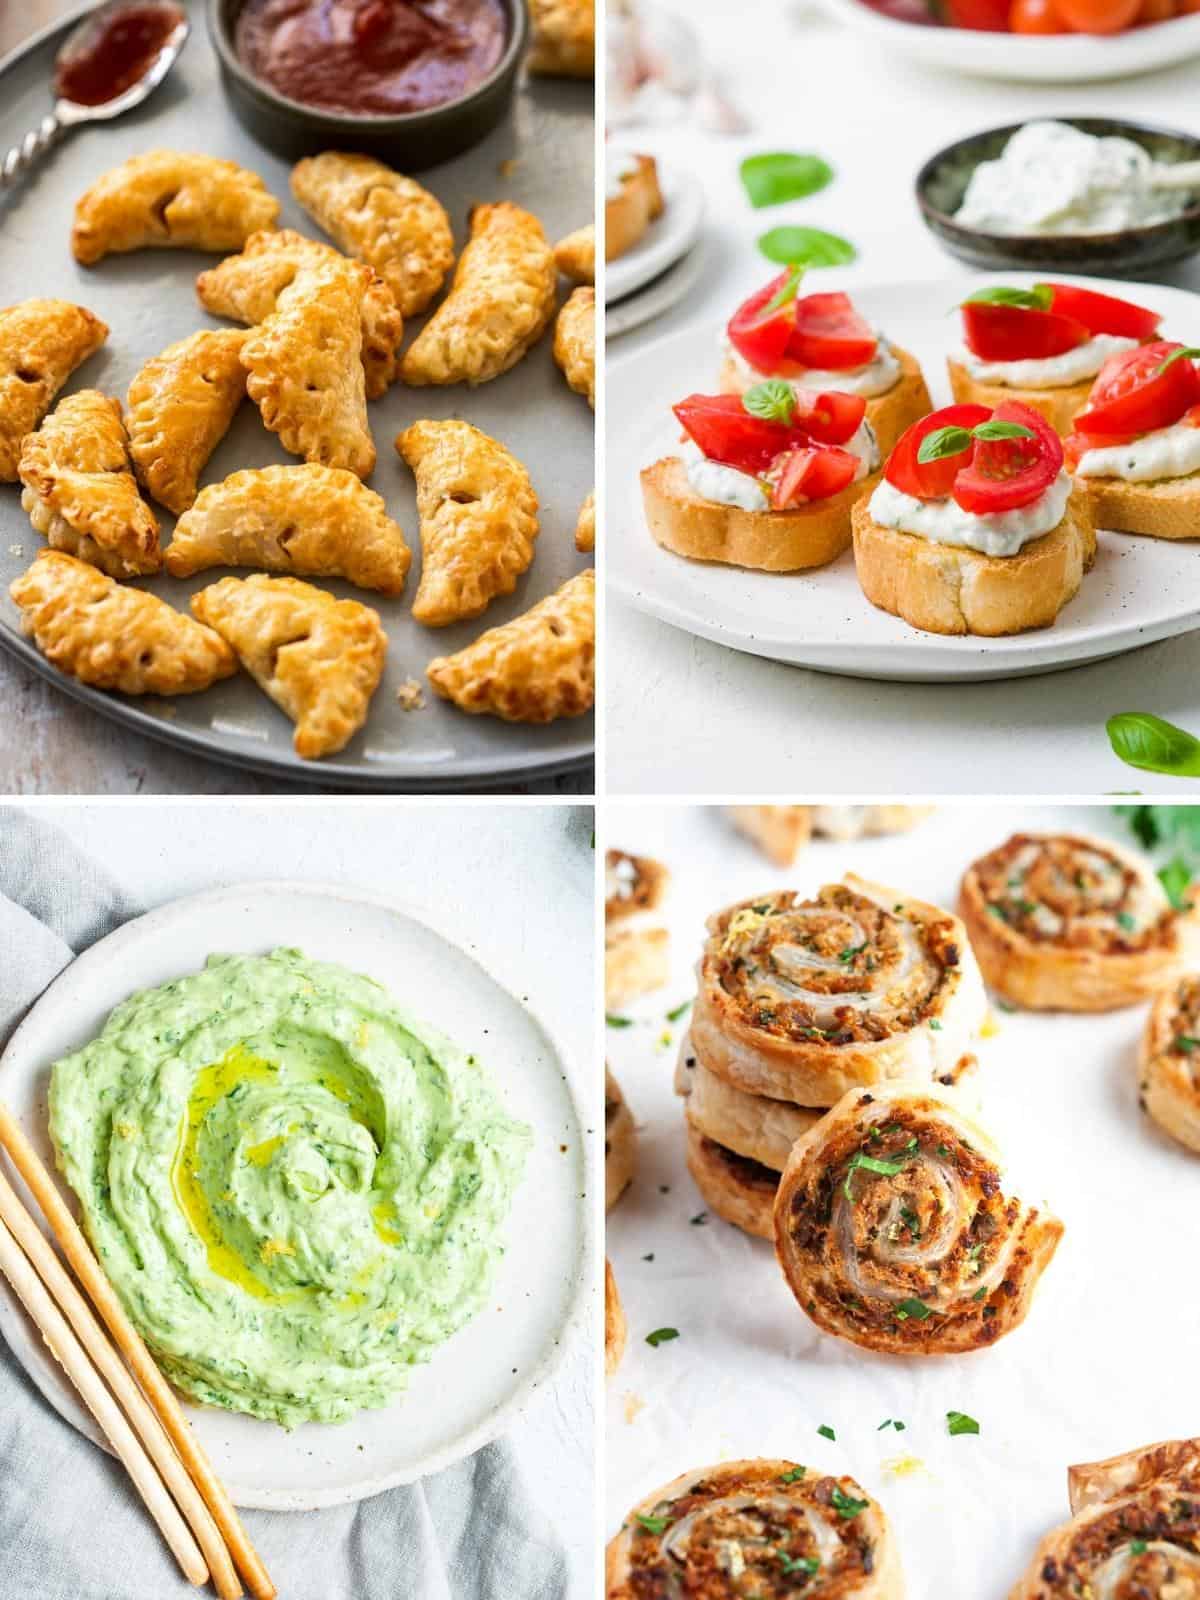 Four savoury appetisers in photo collage - mini bacon pasties, herbed ricotta crostini, green goddess dip and tuna pinwheels.